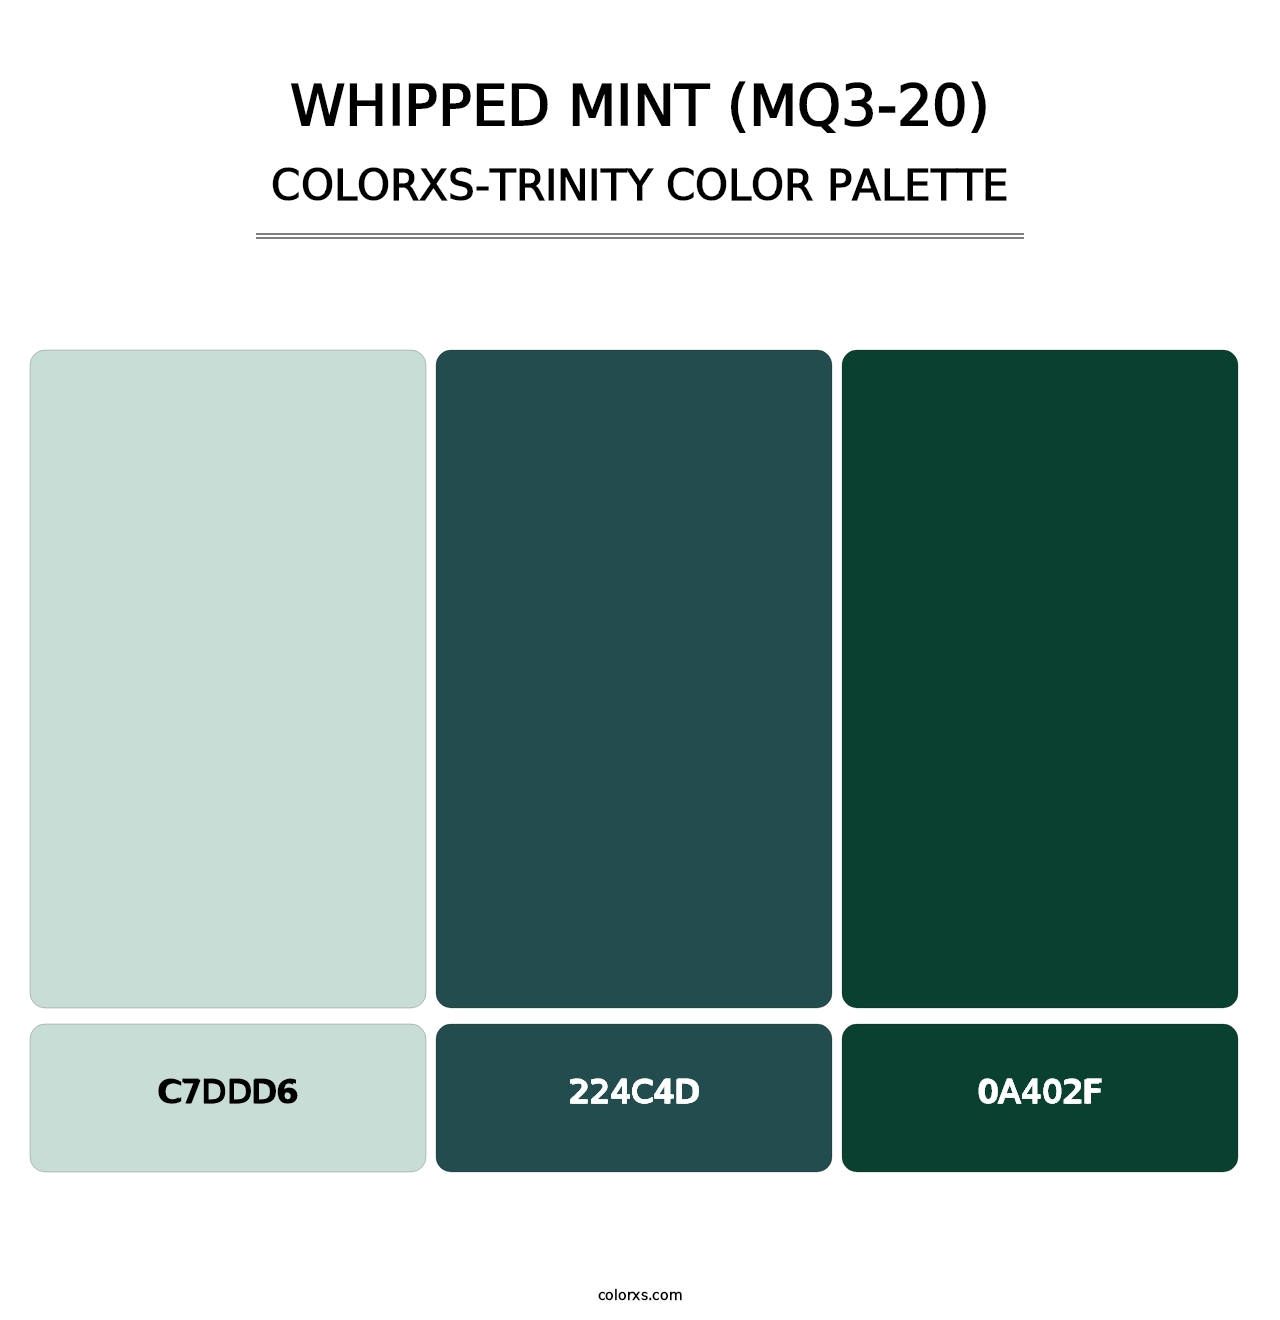 Whipped Mint (MQ3-20) - Colorxs Trinity Palette